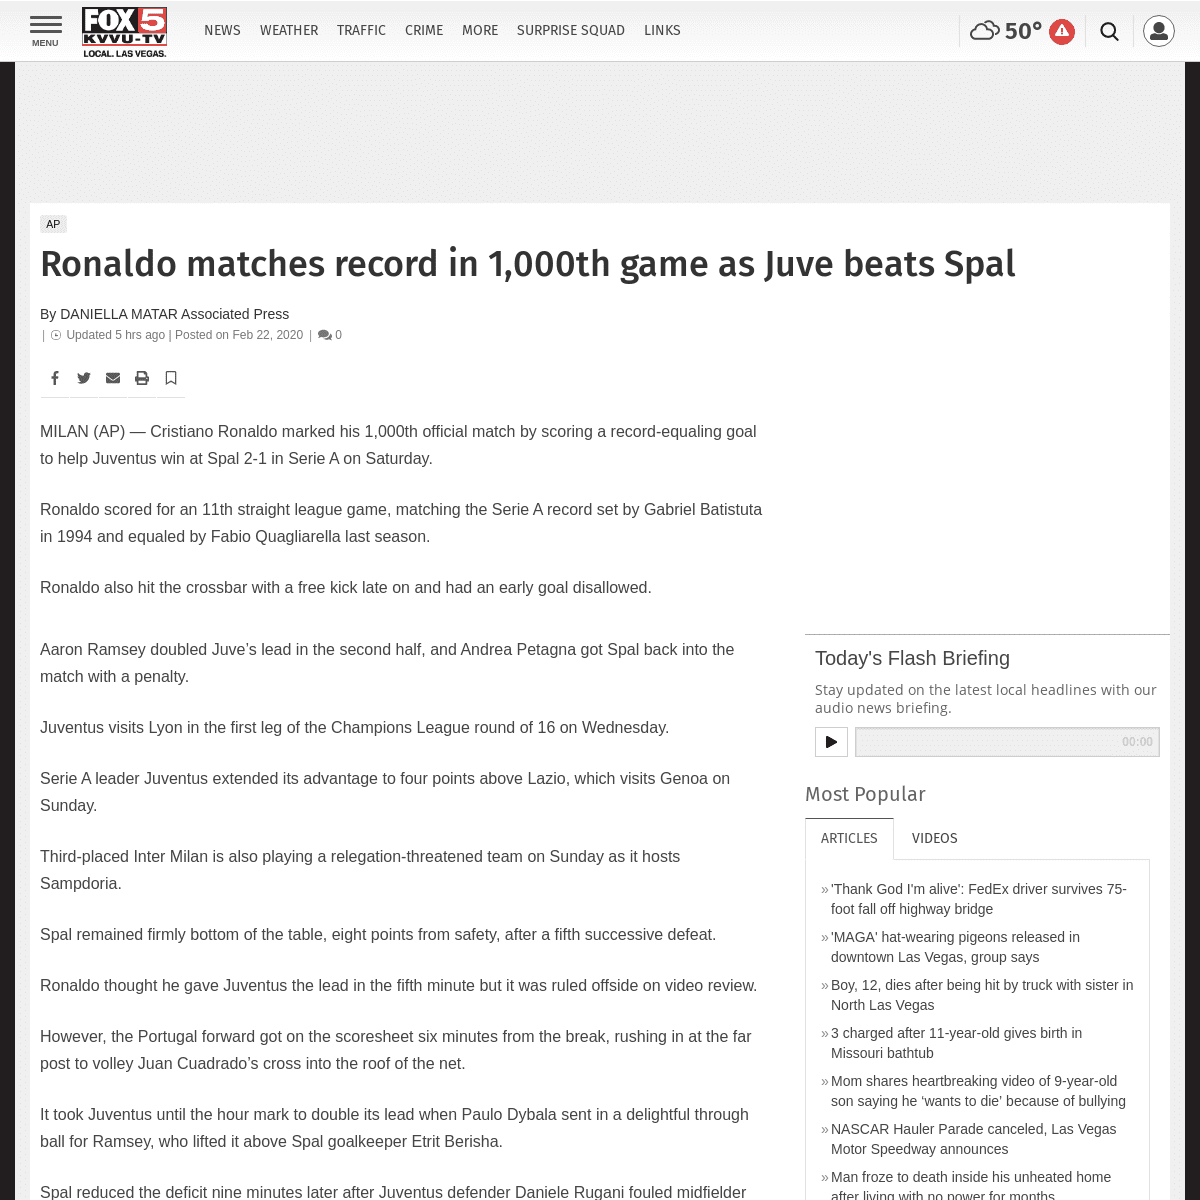 A complete backup of www.fox5vegas.com/ronaldo-matches-record-in-th-game-as-juve-beats-spal/article_067c72fe-4306-5fe4-a71c-8ae9